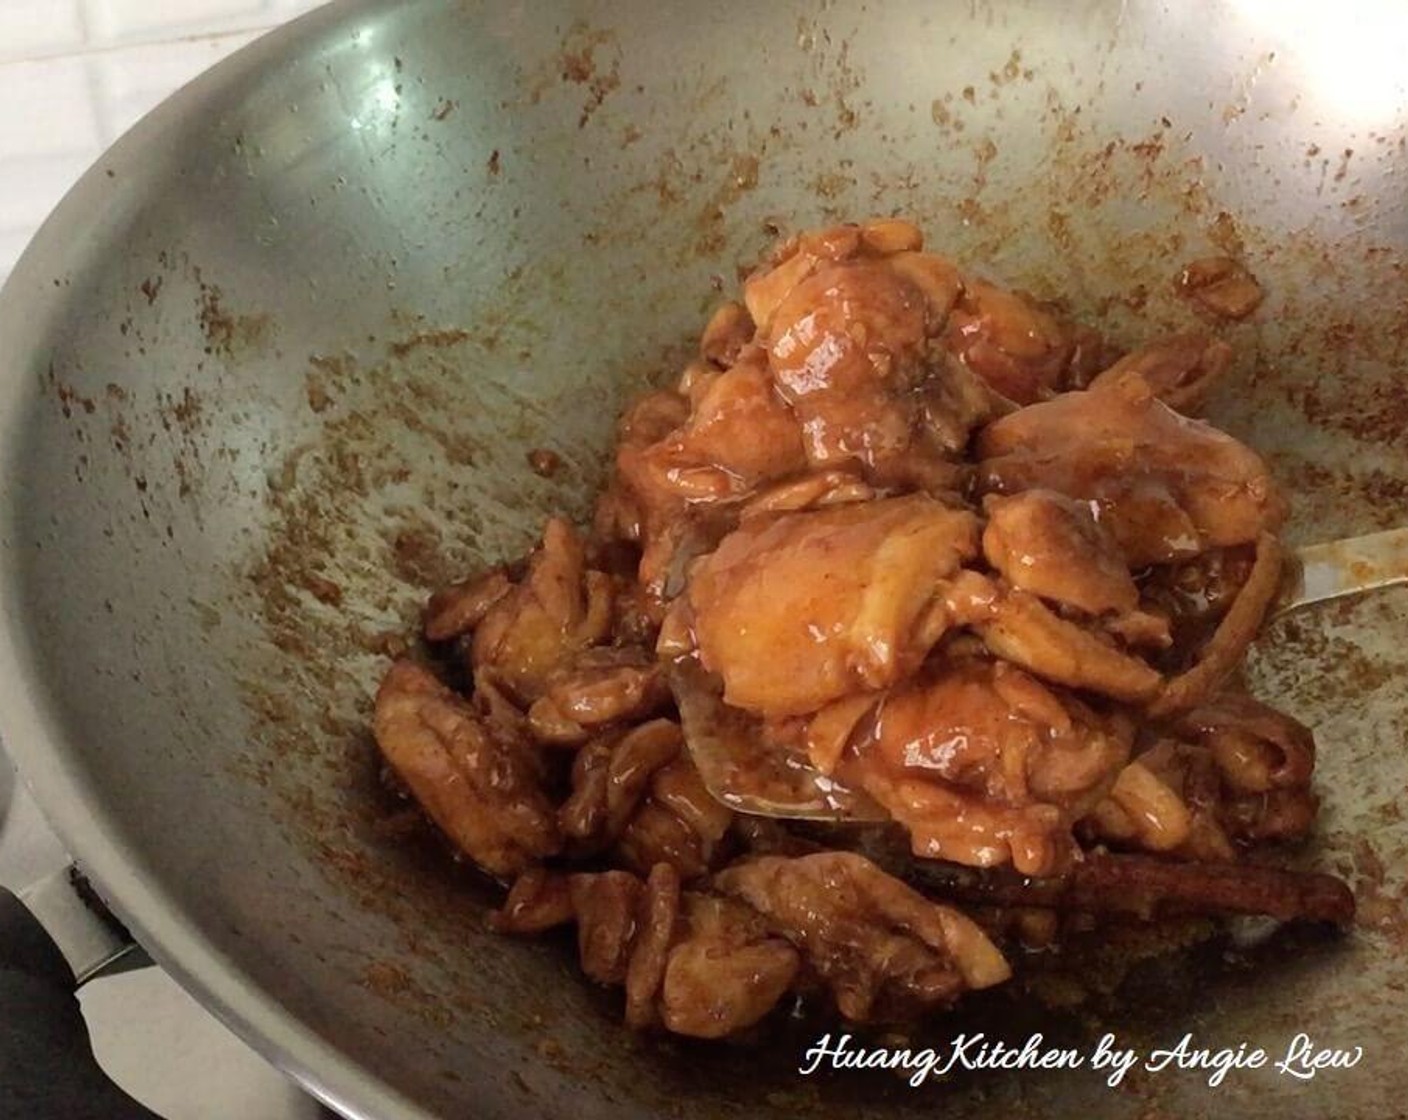 step 4 Then heat up oil in a wok and briefly fry the marinated chicken with chopped Garlic (6 cloves) until they brown lightly.